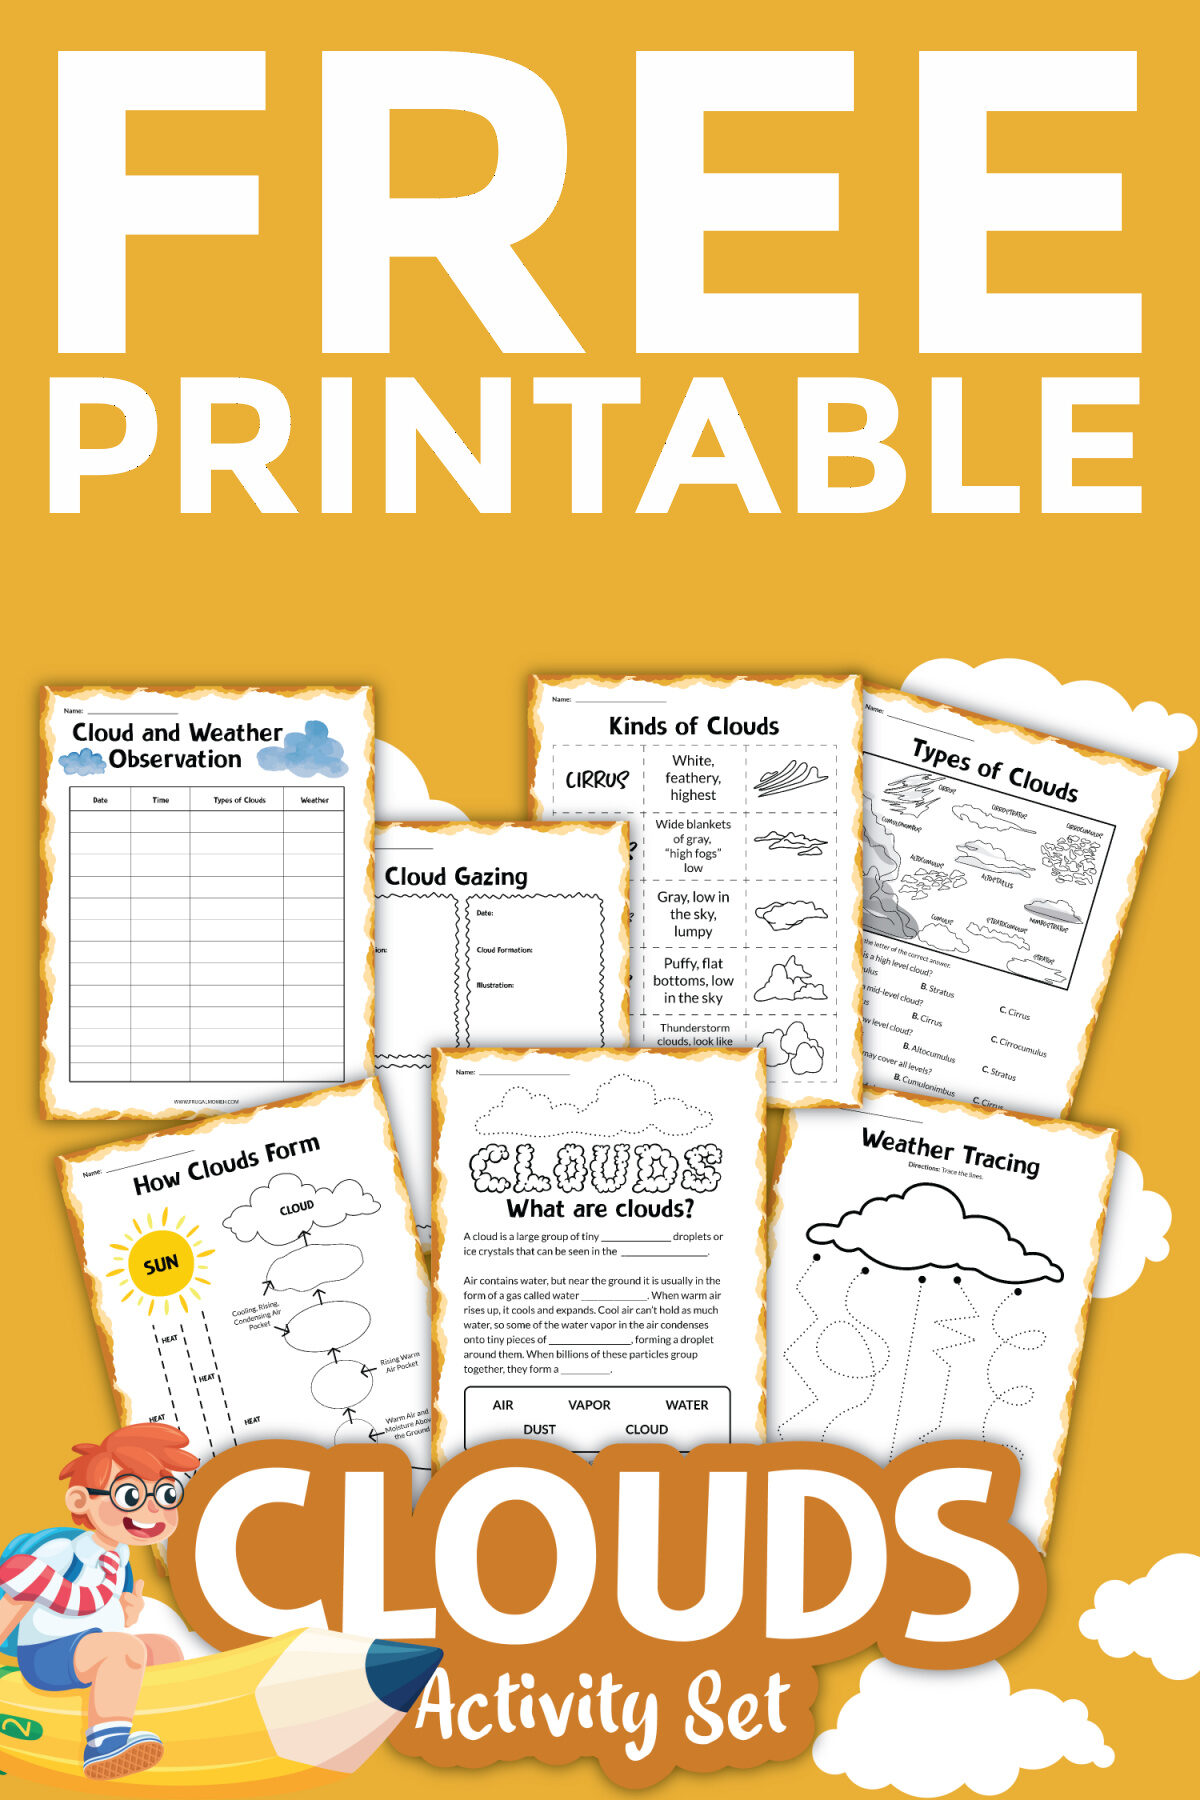 Download this Free Printable Clouds Activity Sheets Set for a fun and engaging learning experience for kids.